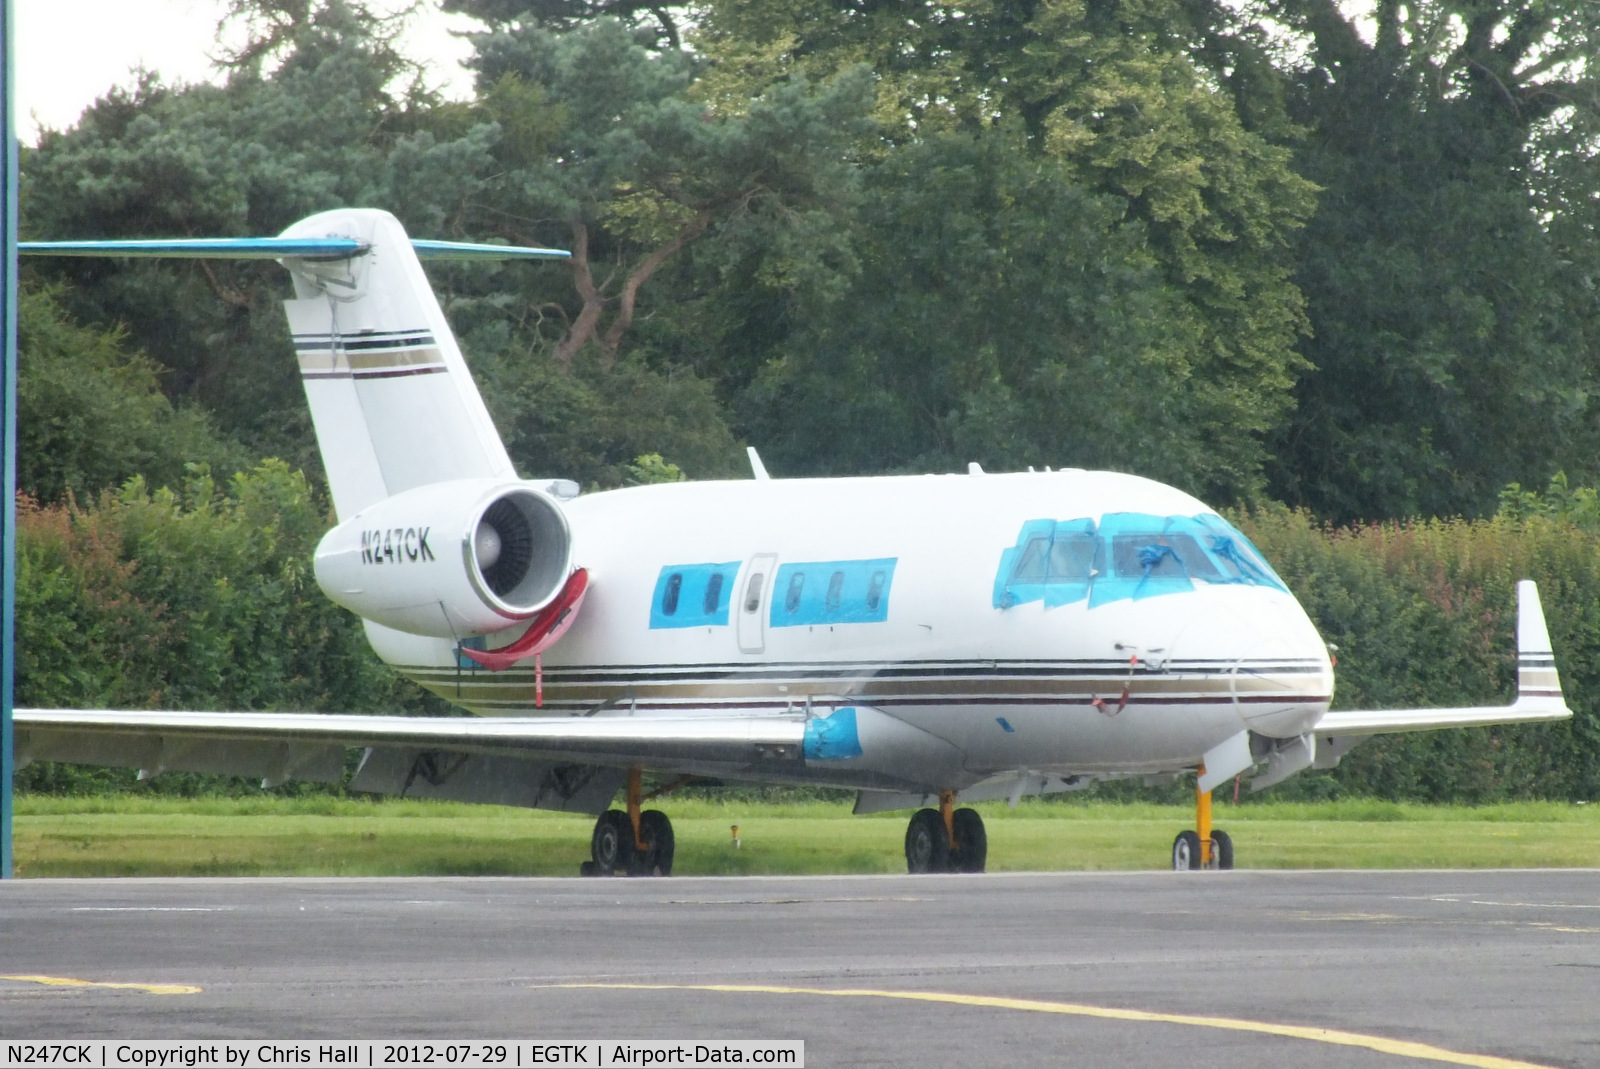 N247CK, 1982 Canadair Challenger 600S (CL-600-1A11) C/N 1045, appears to be in storeage at Oxford